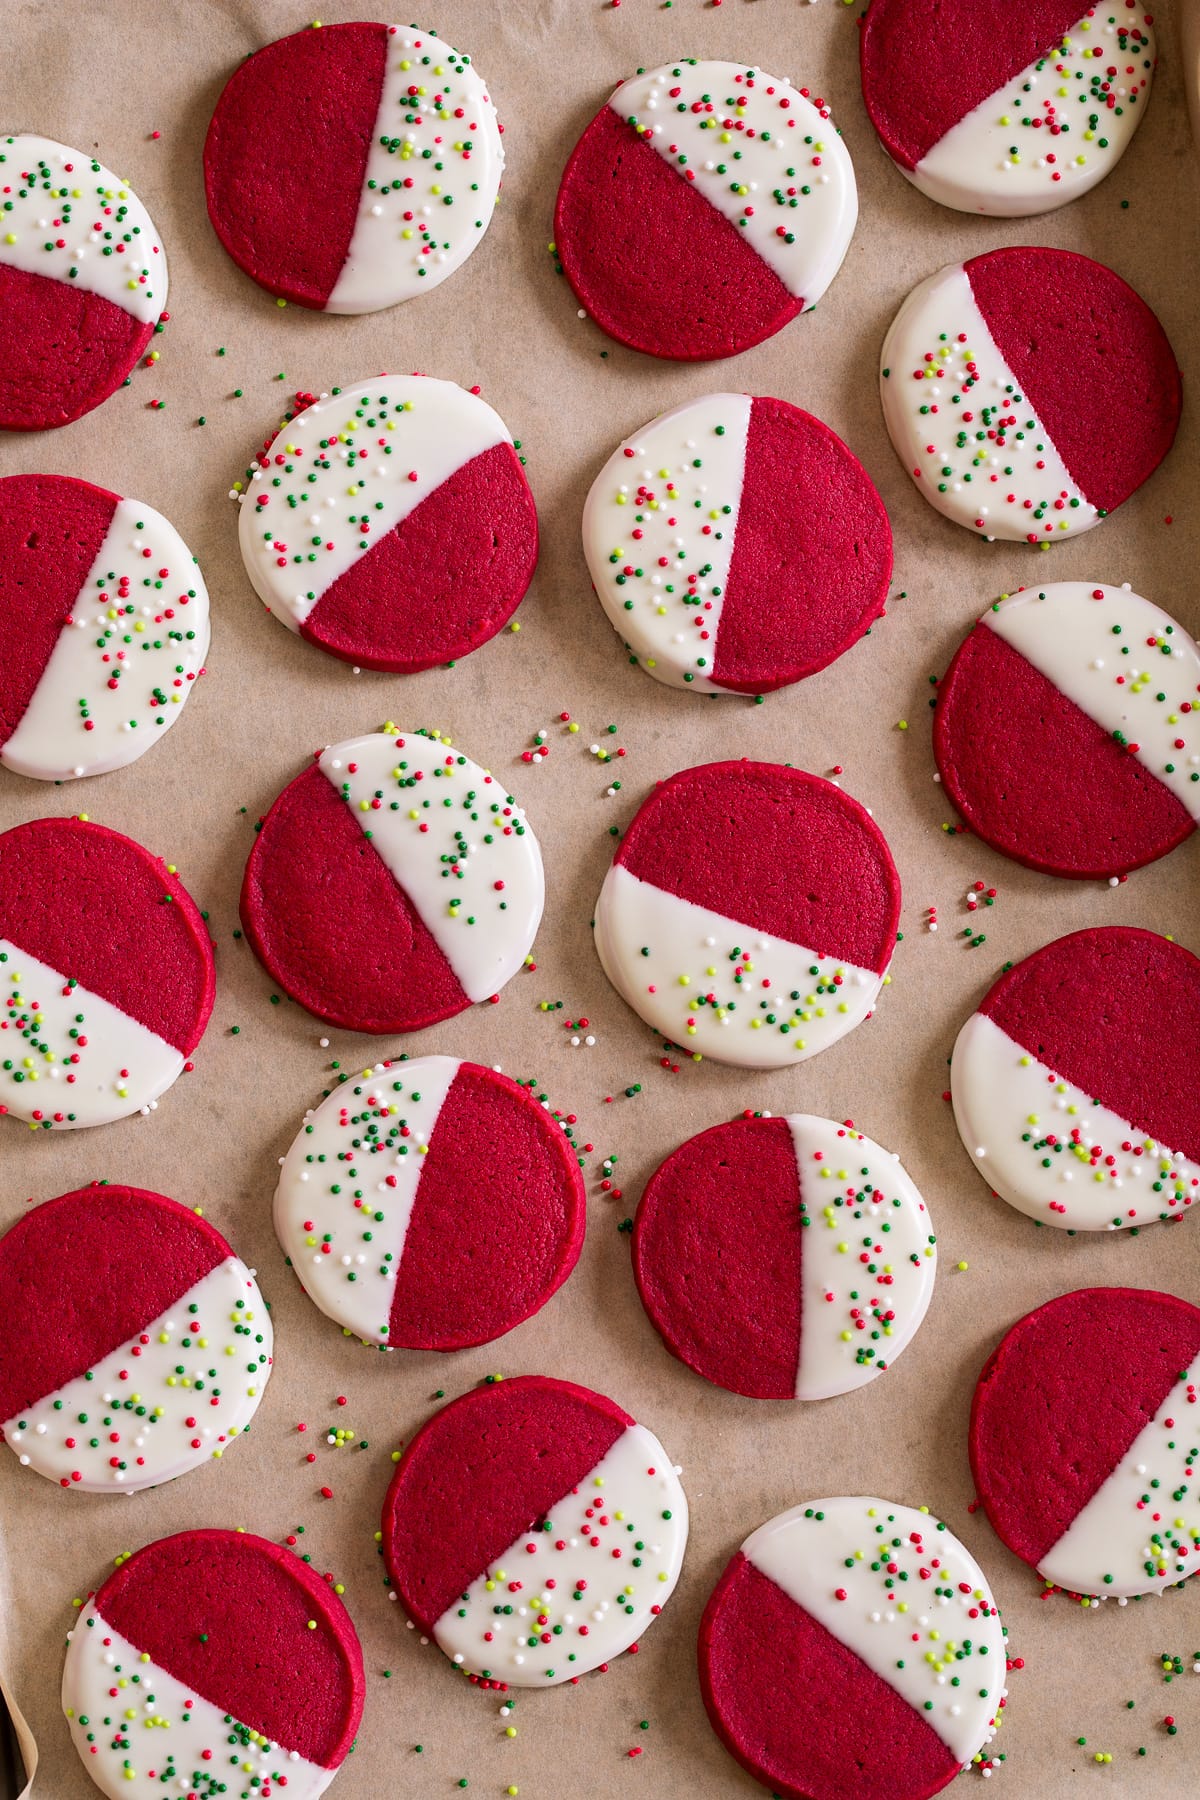 Red velvet shortbread shown dipped in white chocolate and resting on parchment paper.